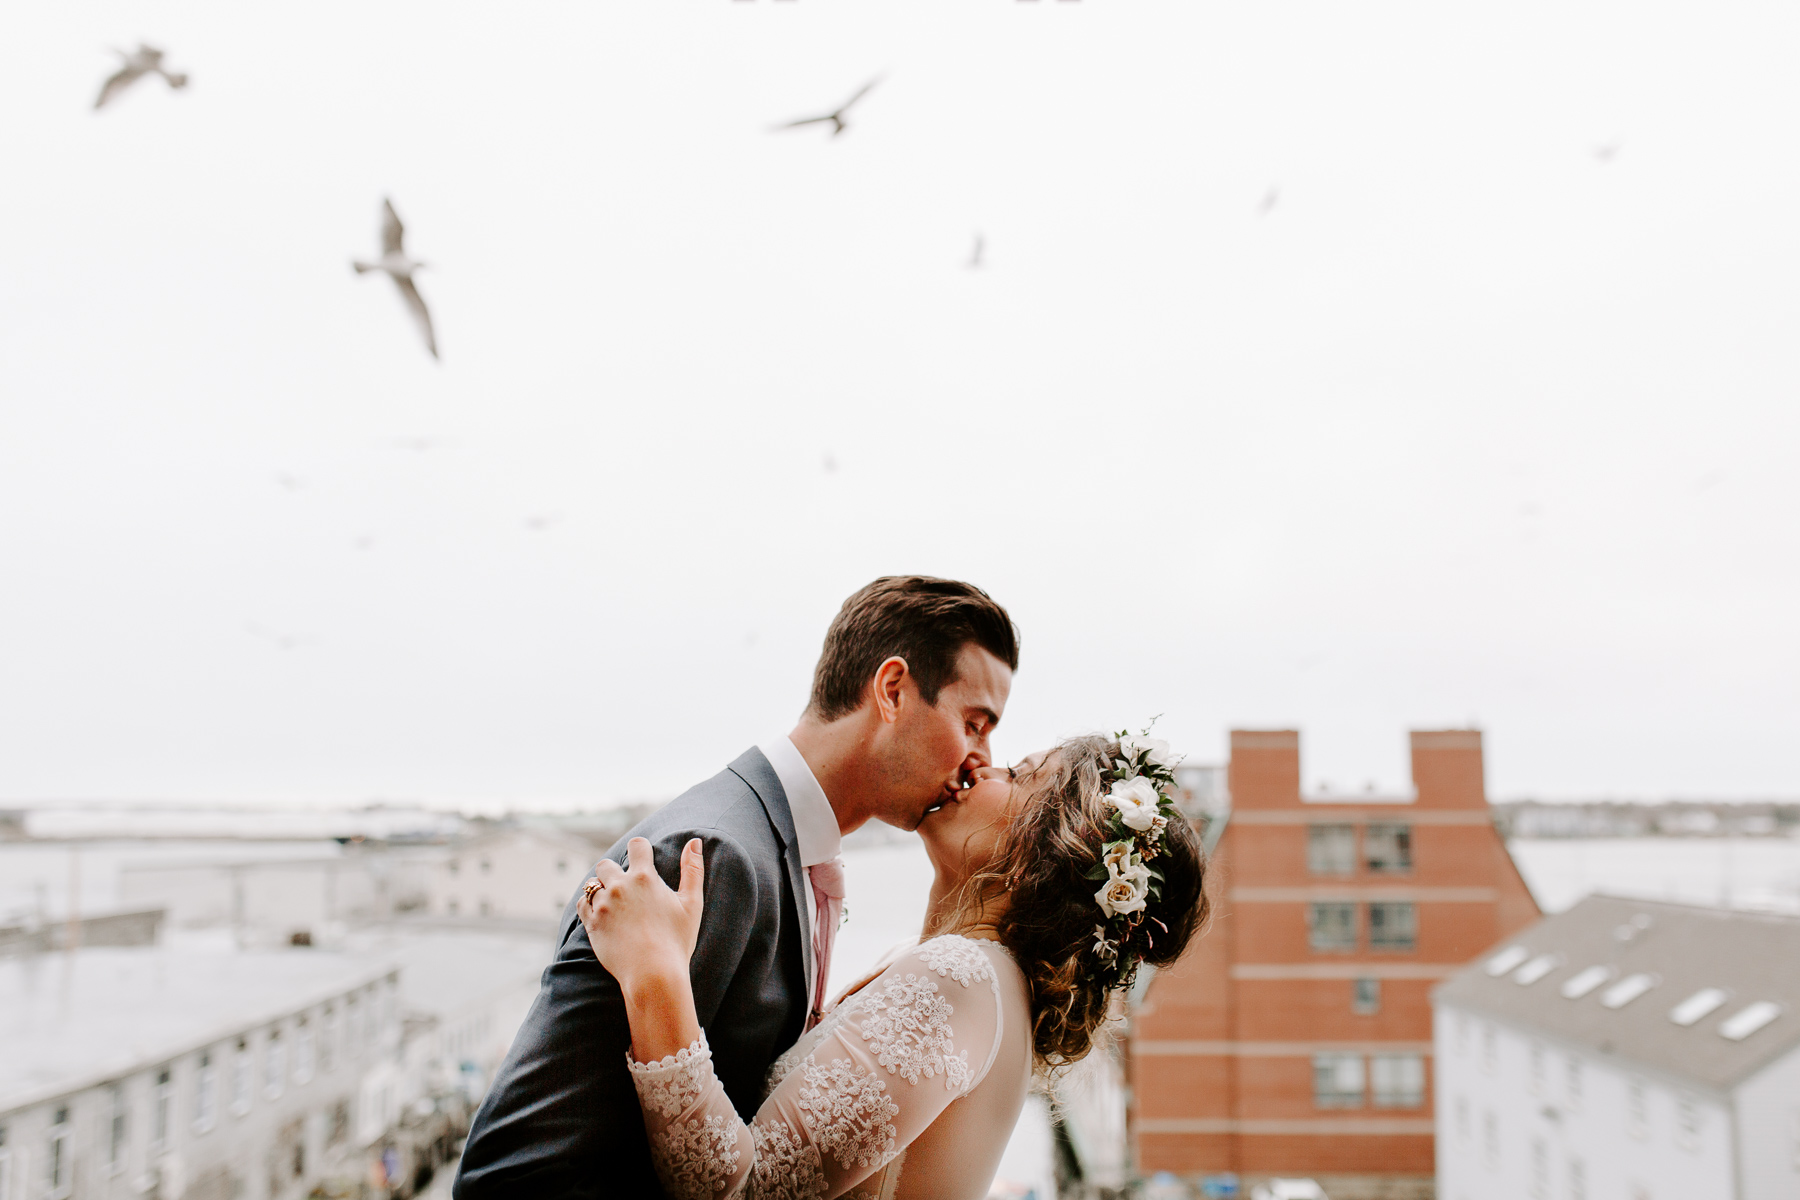 A bride and groom kiss overlooking Portland Harbor in Portland, Maine and sea birds fly above